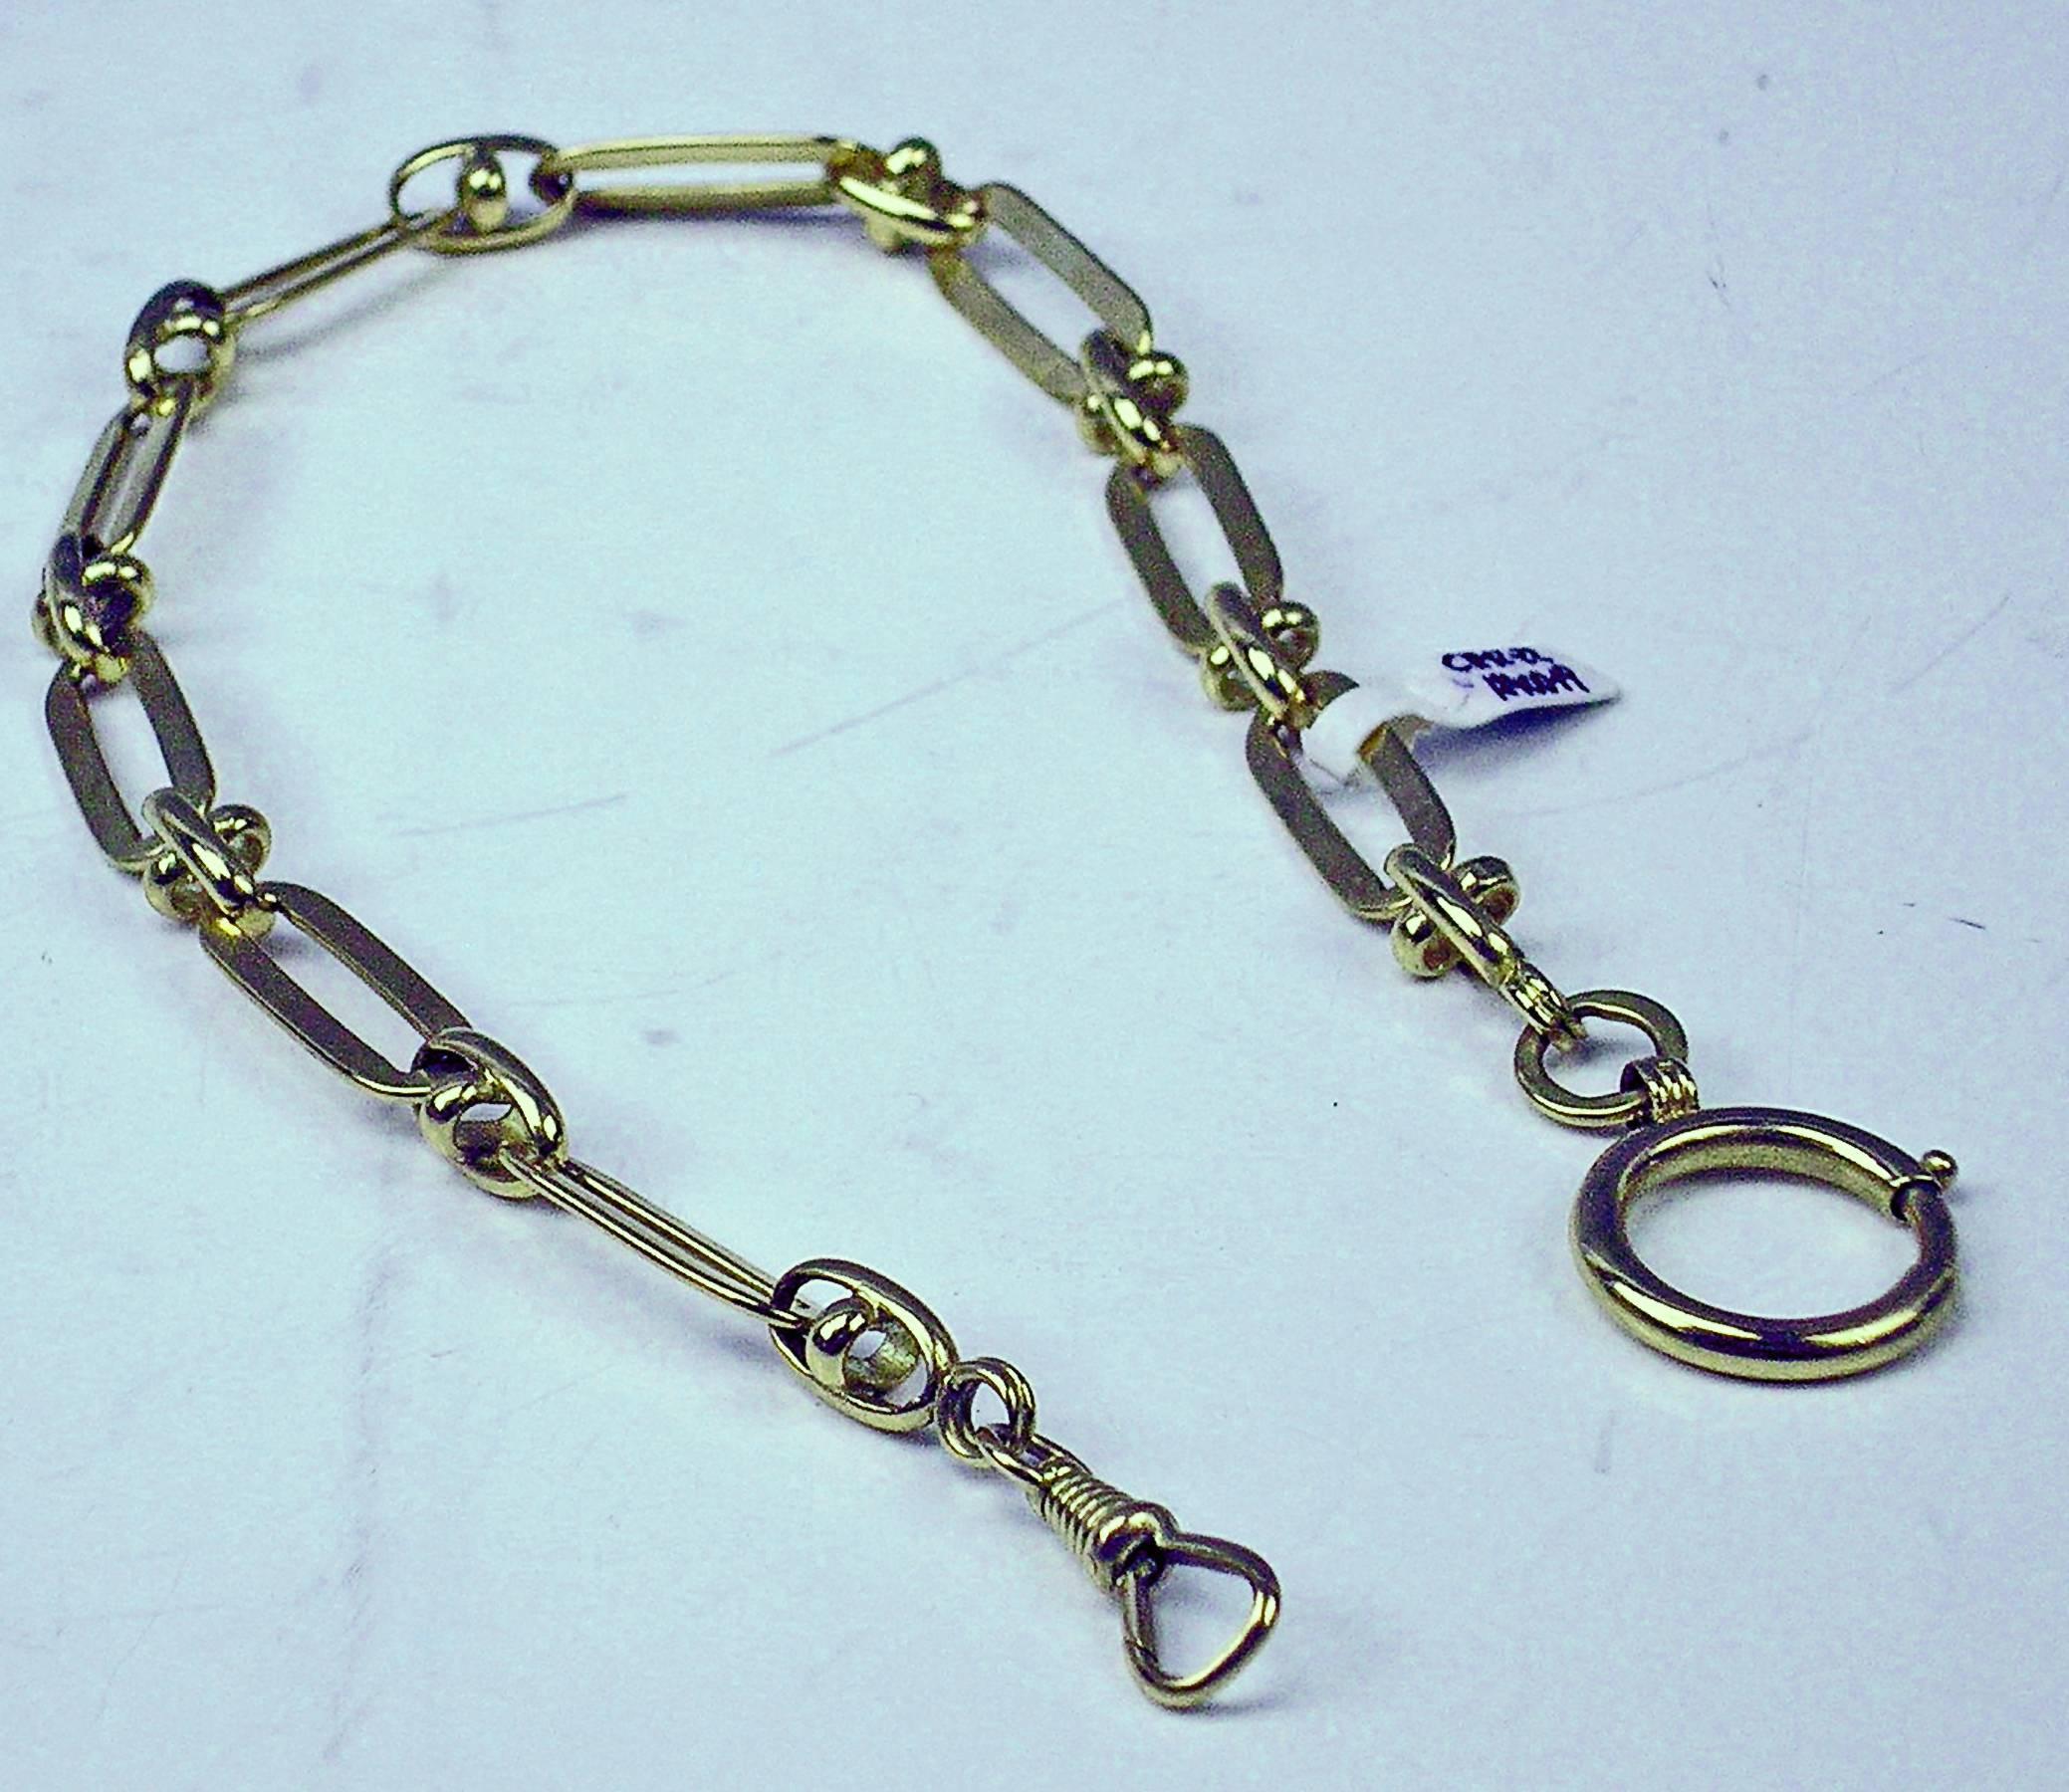 Most elegant golden chain of pocket watch.

GOLD  (14 CARAT GOLD / 585) 

Skipping ring and spring hook ( = carabiner ) existing.

Total length:  34.5 cm     13.58  inches

Hallmarked:
Austrian Official Punch   
( so-said Fuchskopfpunze  